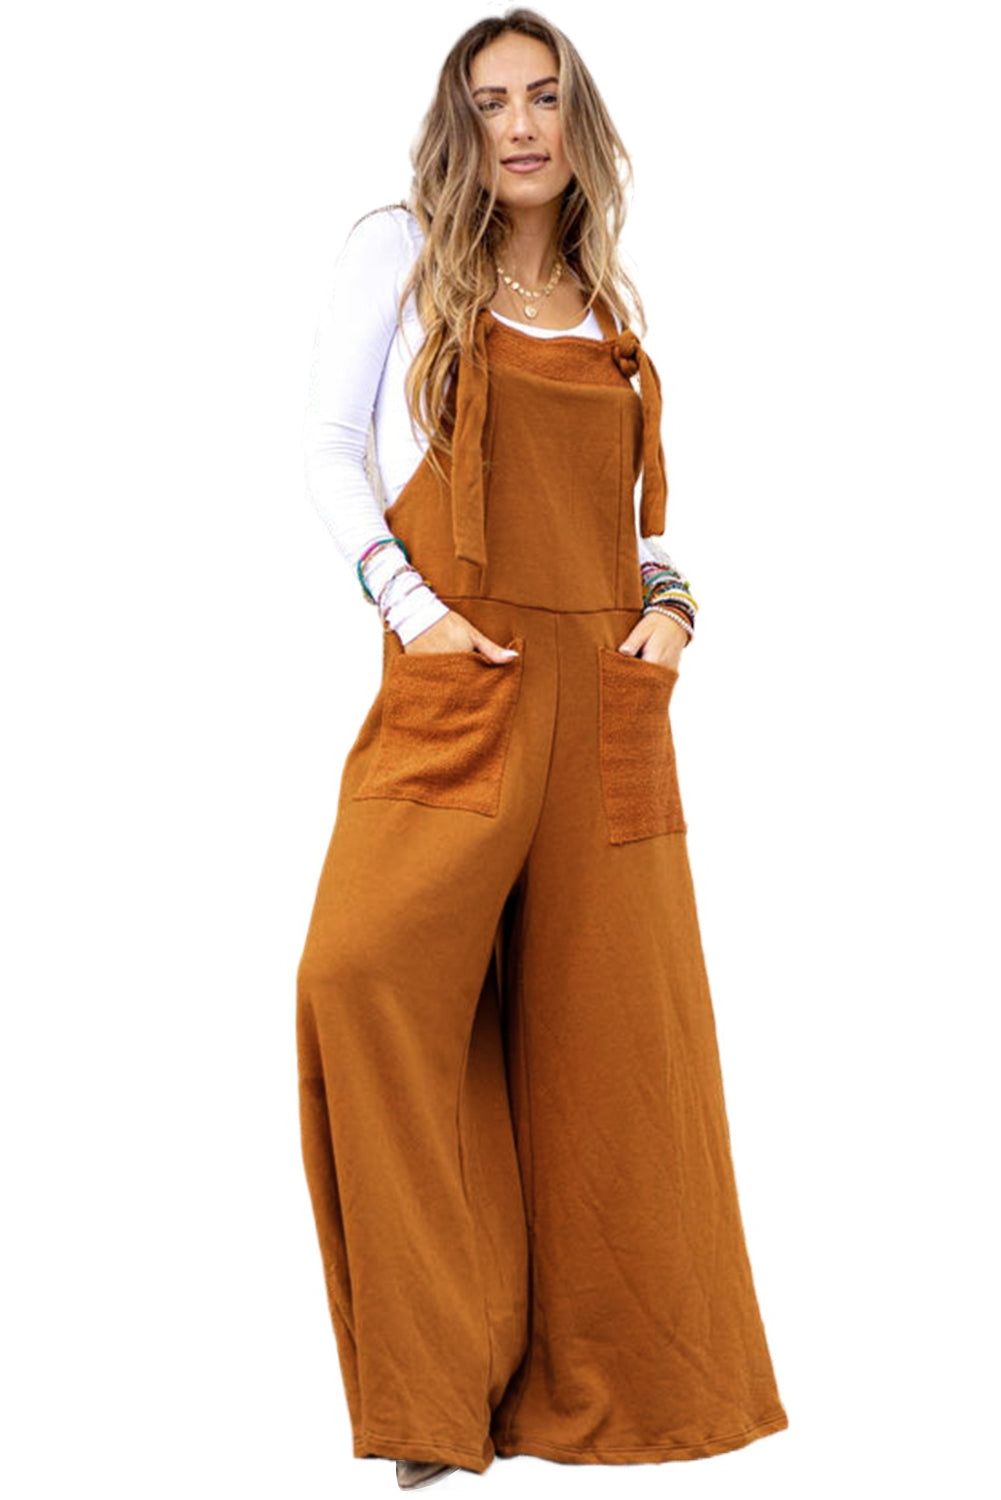 Brown Knotted Straps Patch Pocket Wide Leg Jumpsuit